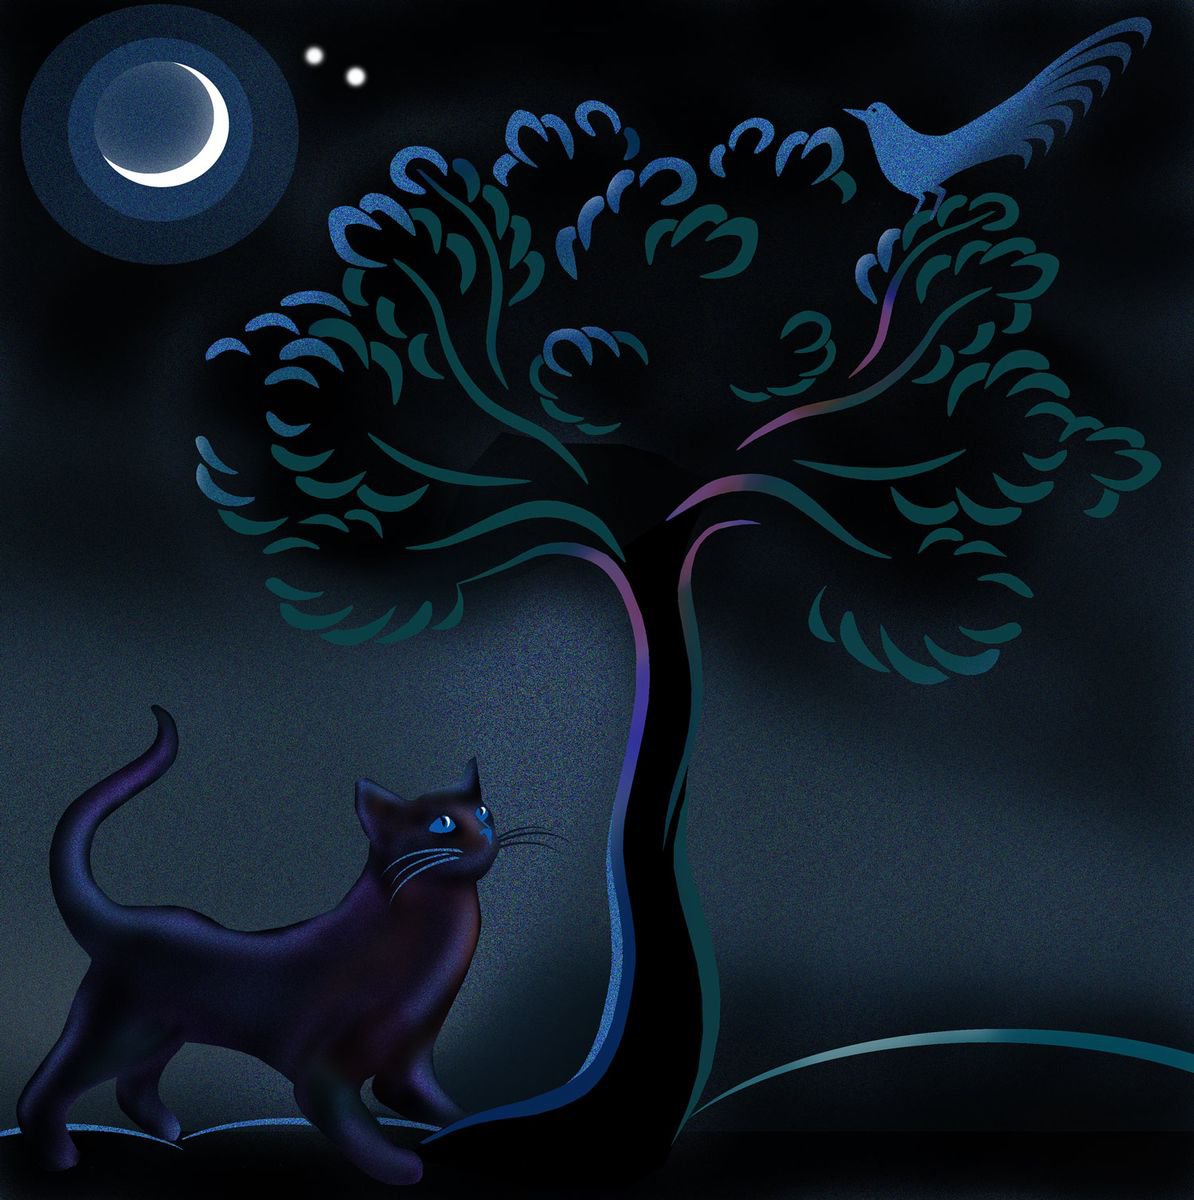 Cat, Tree and Bird by Moonlight; landscape scene. Variable edition print (violet) by Phyllis Mahon